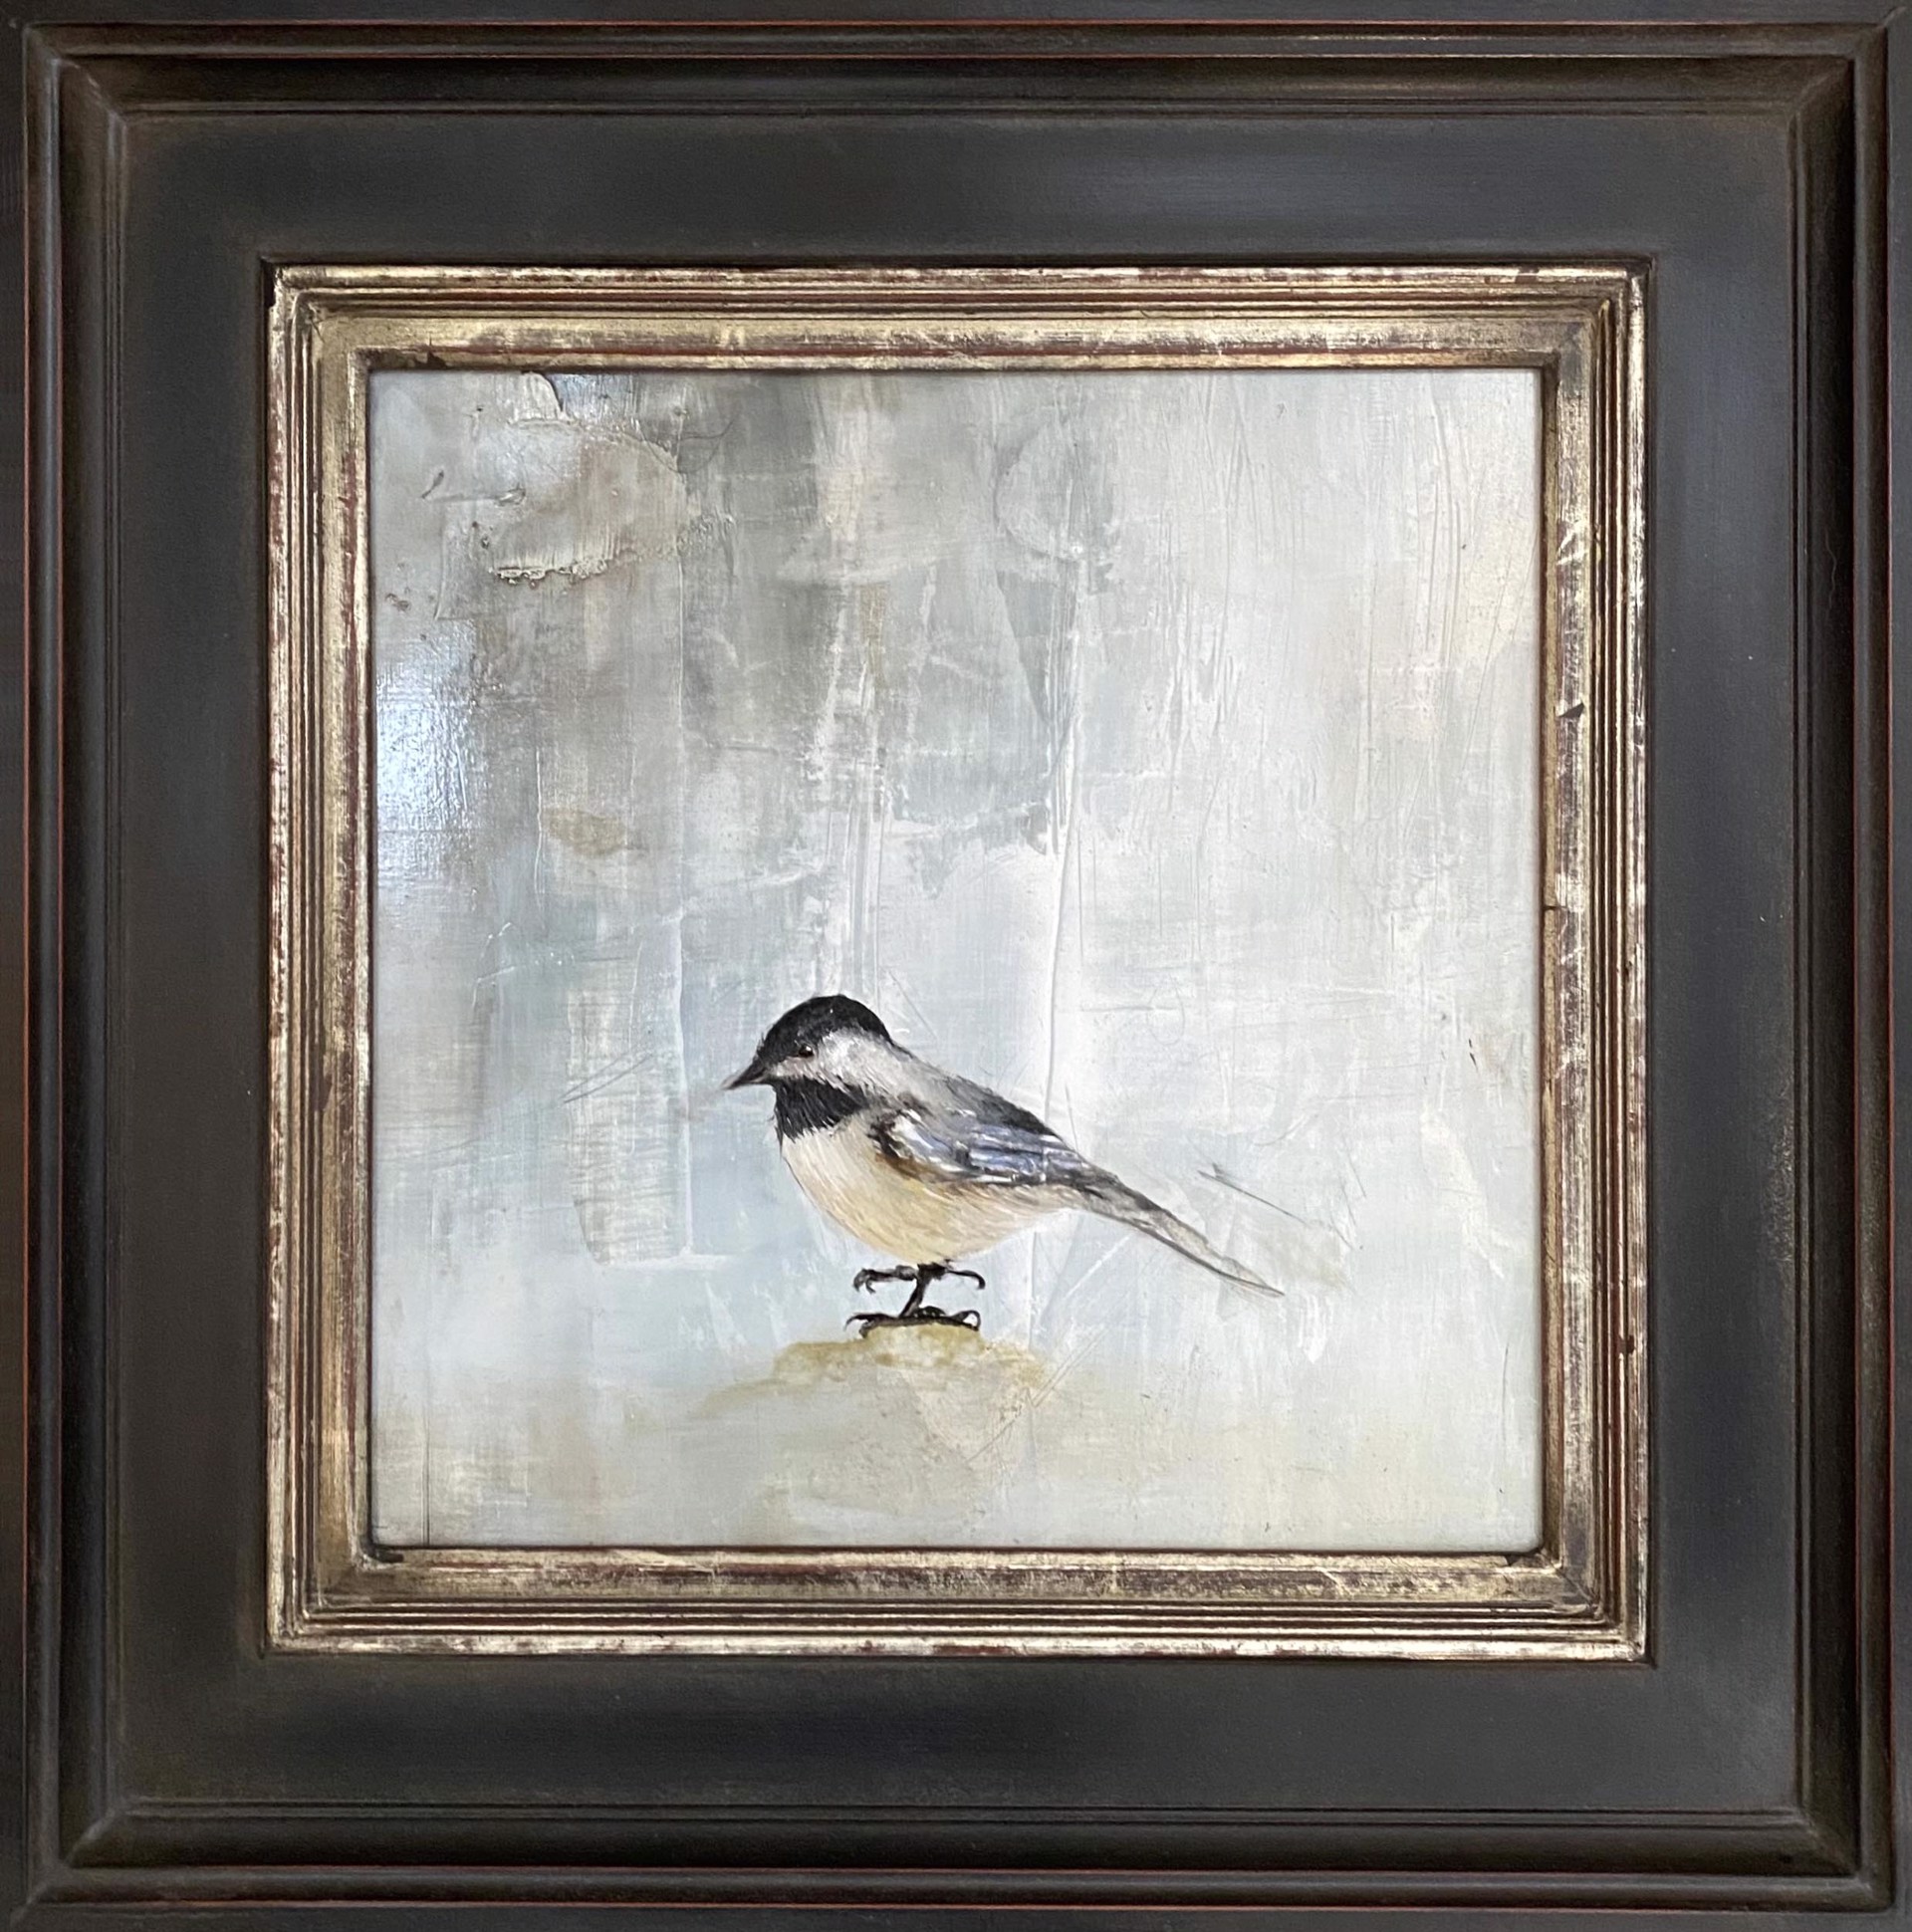 A Contemporary Oil Painting Of A Black Capped Chickadee On A Abstract Gray And Tan Background